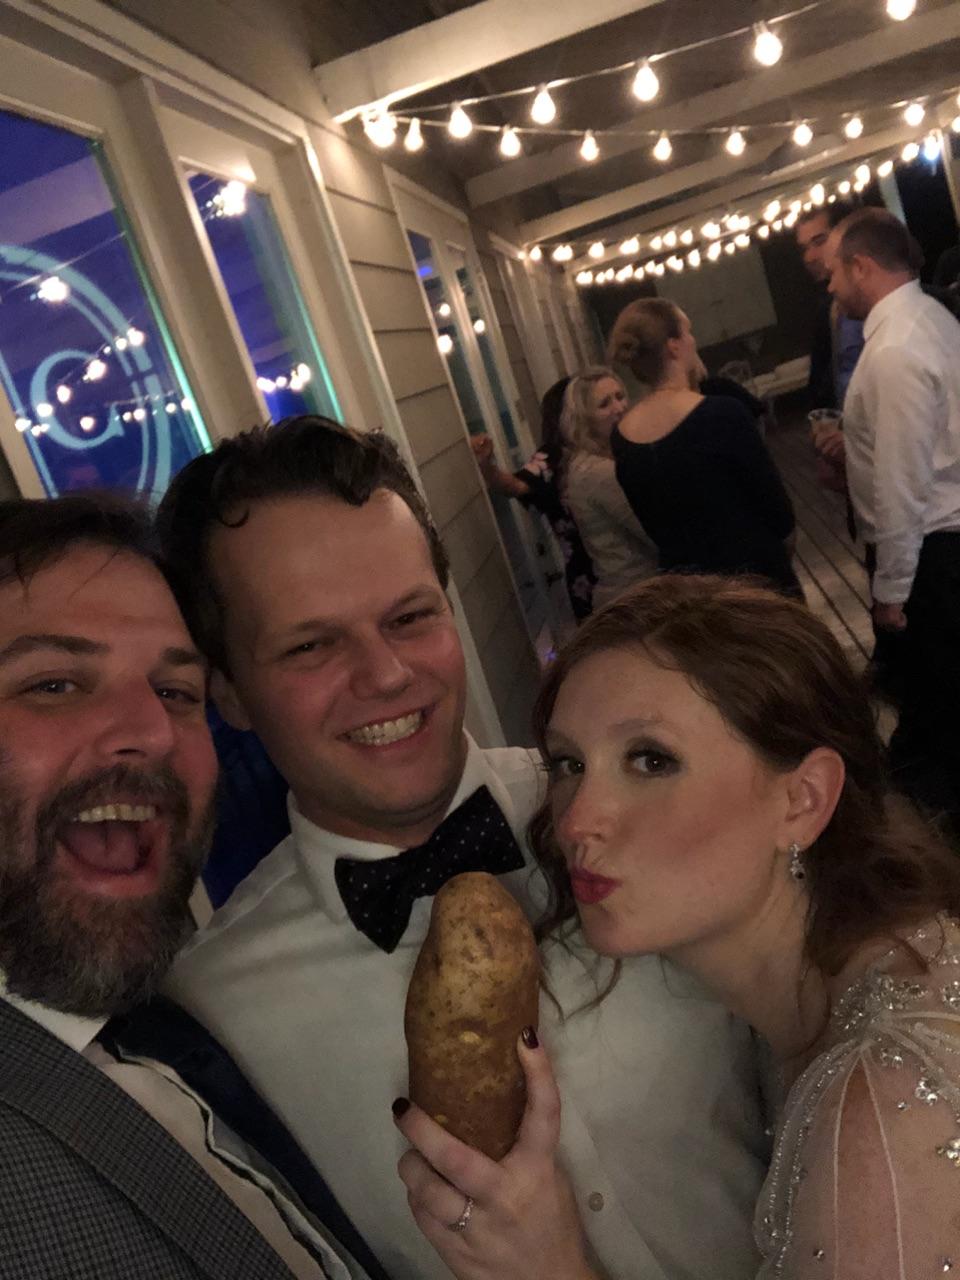  Finally a picture with the Bride and Groom! Was trying to snag this all night, even with a photobomb. 